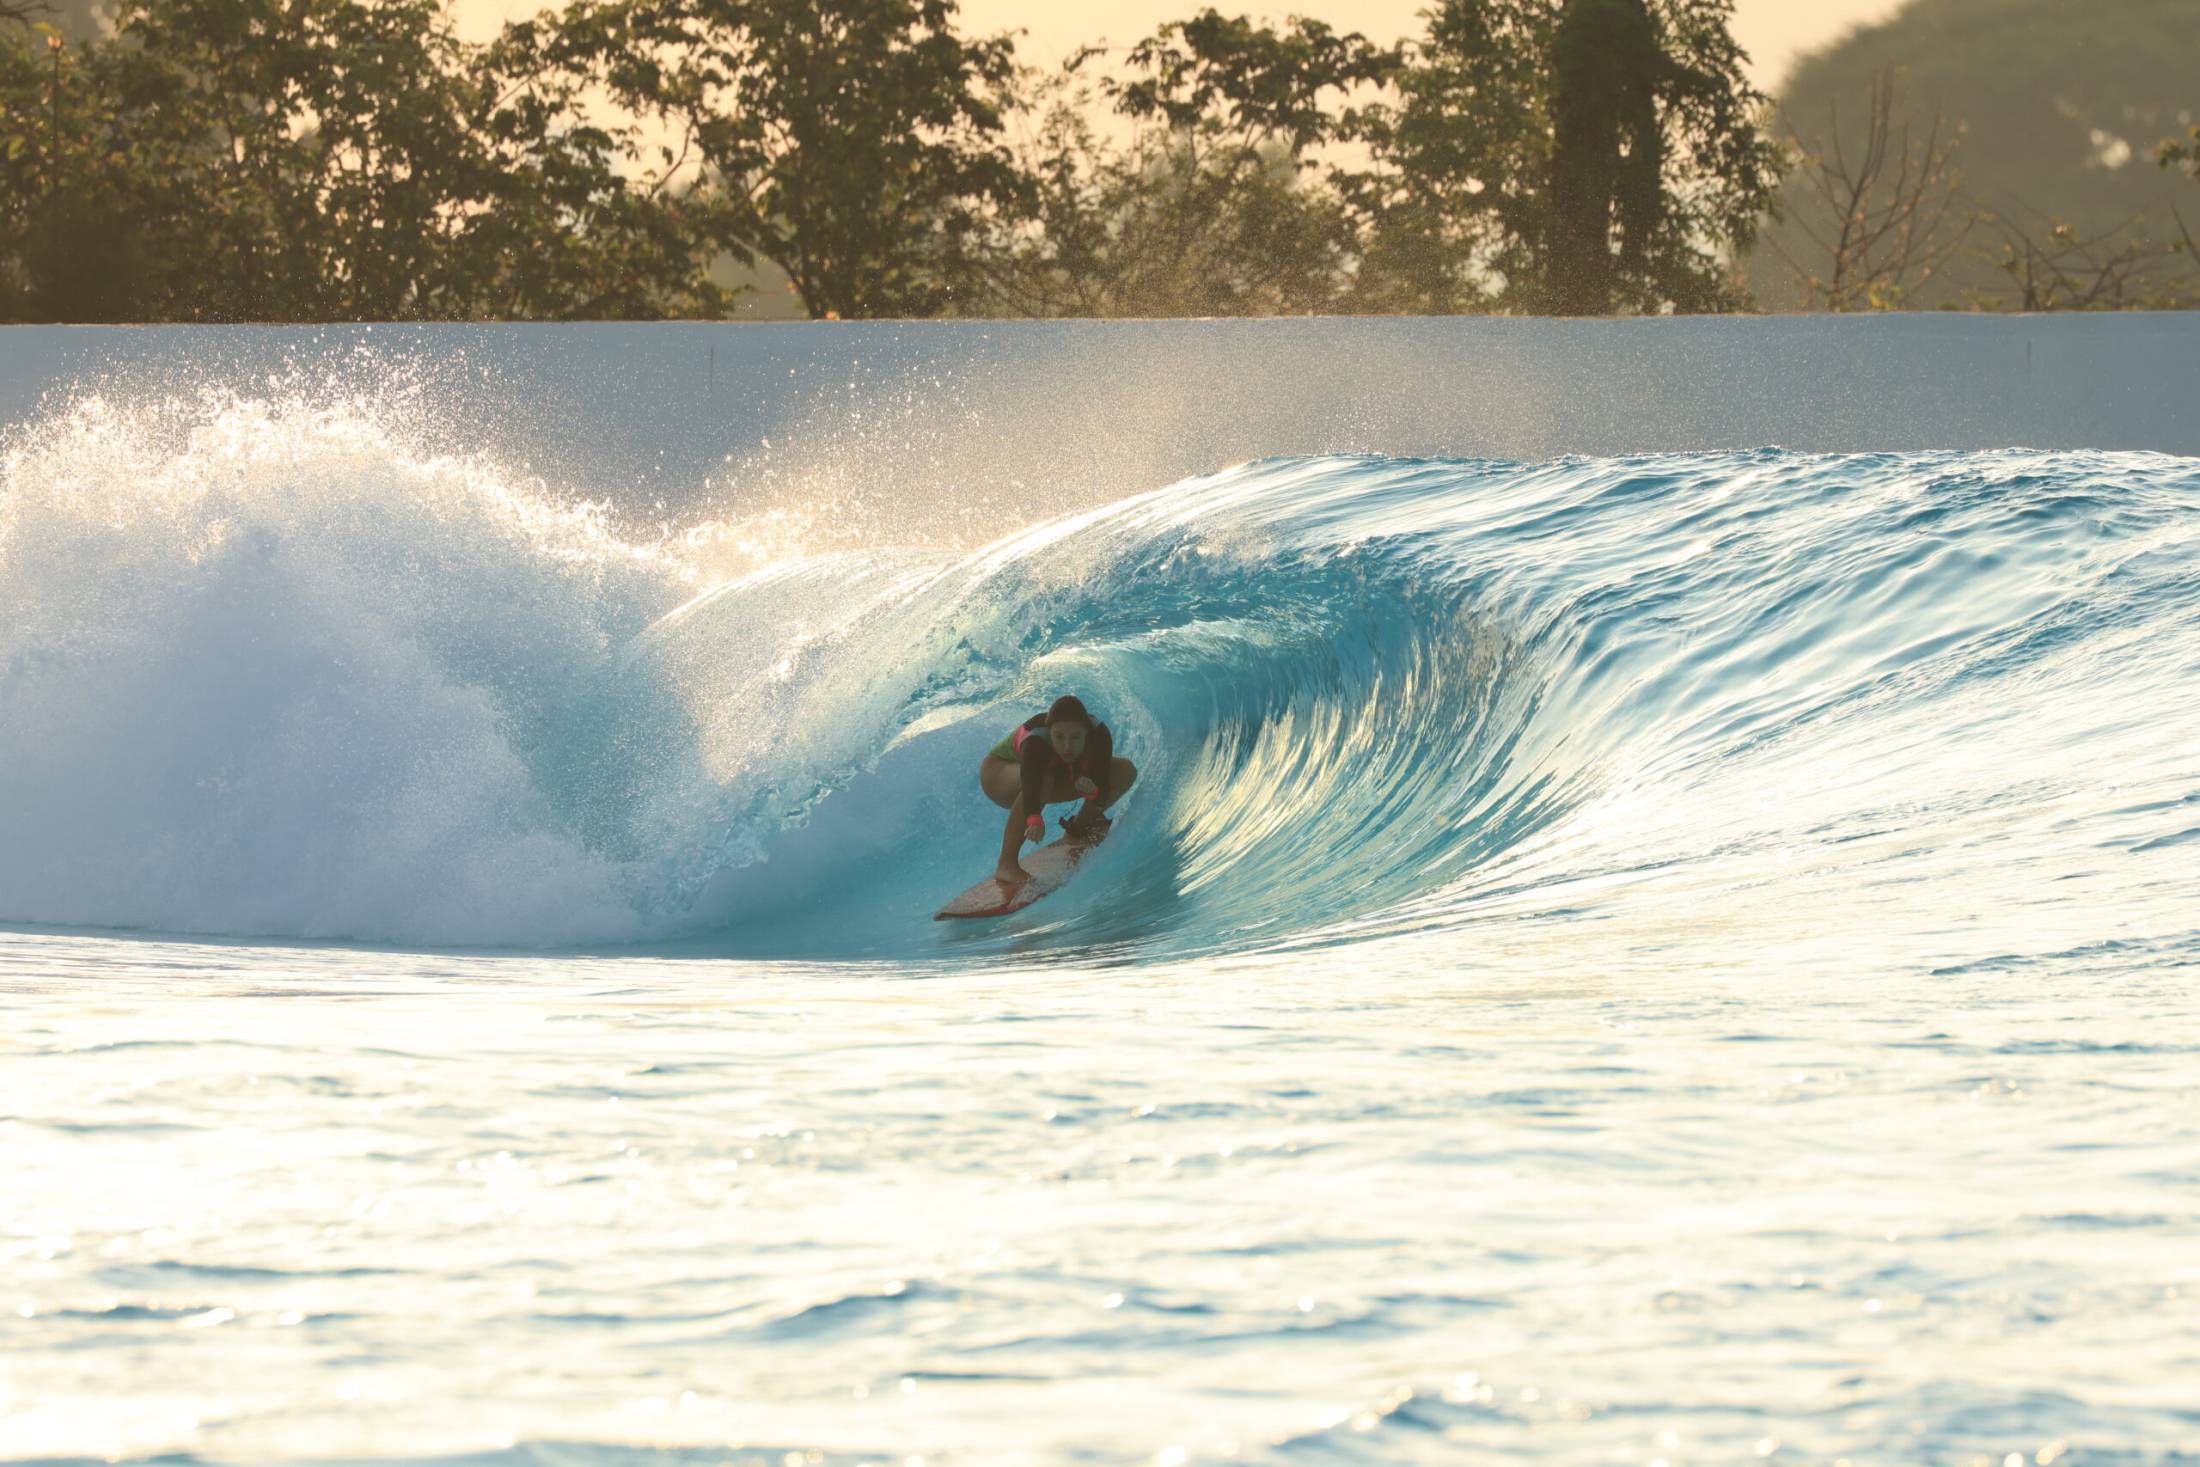 SURFLAND BRASIL IS OPEN TO THE PUBLIC